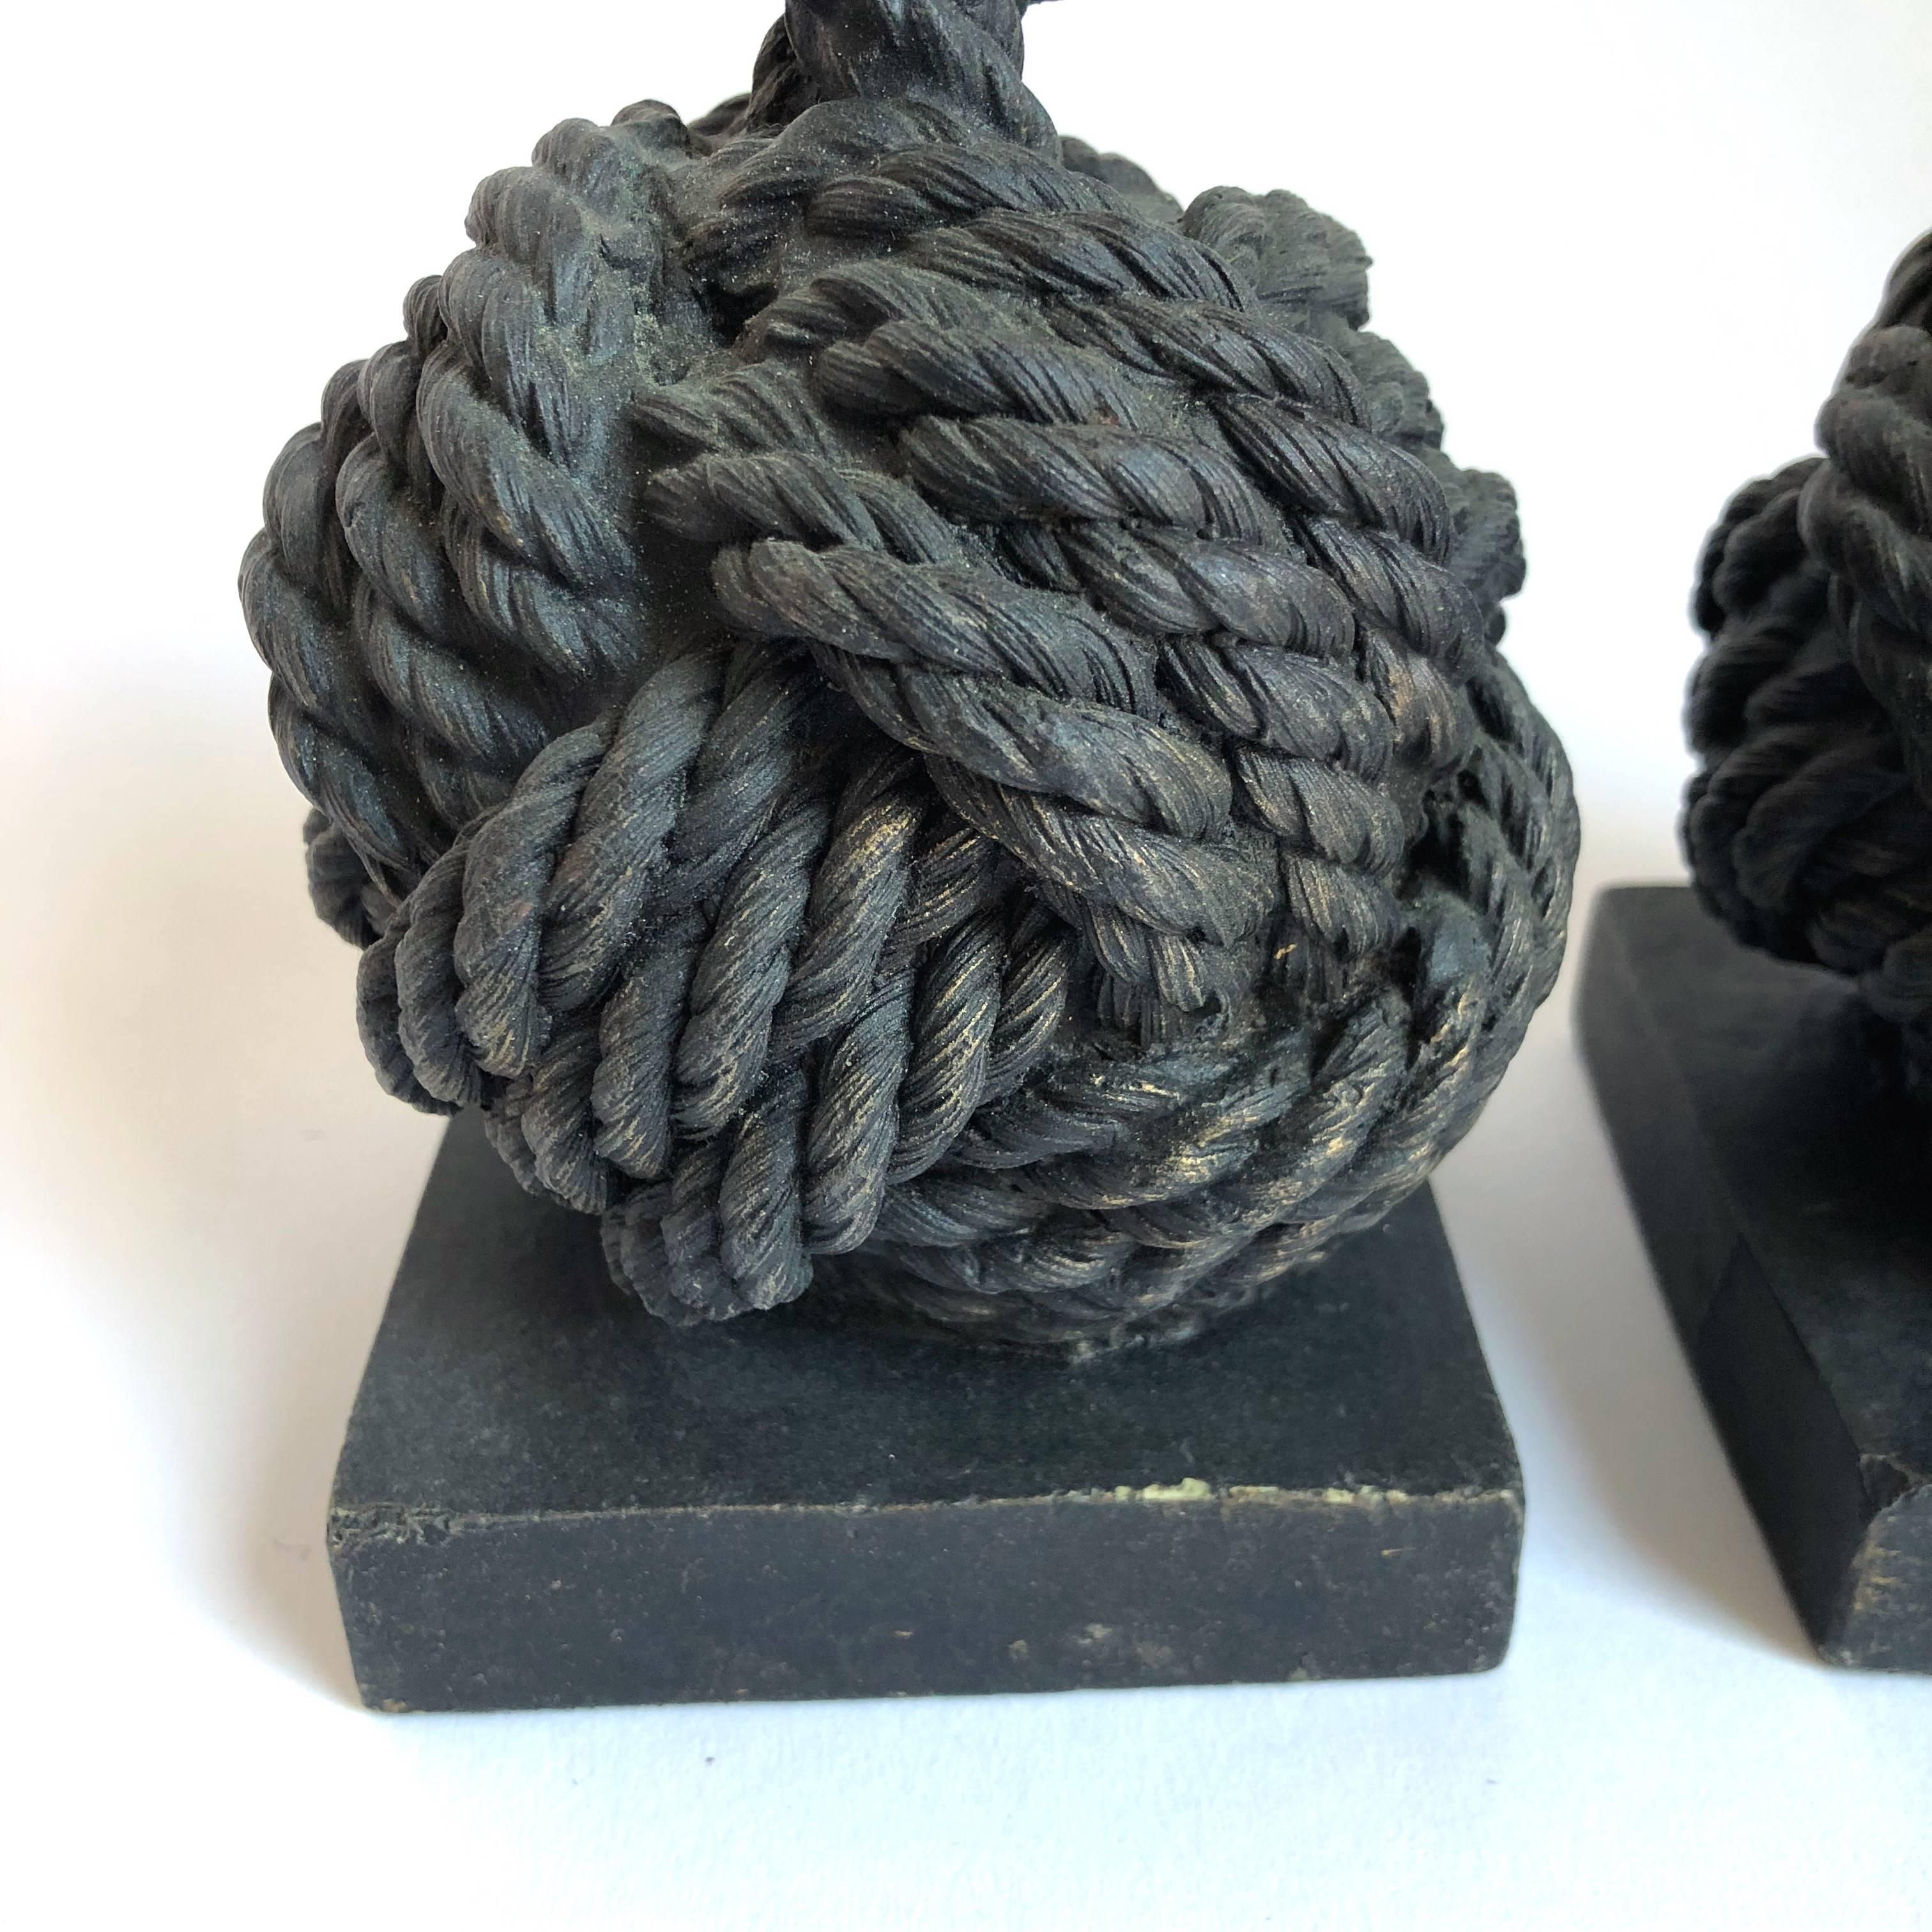 Pair of bronze monkey fist knot bookends.
 